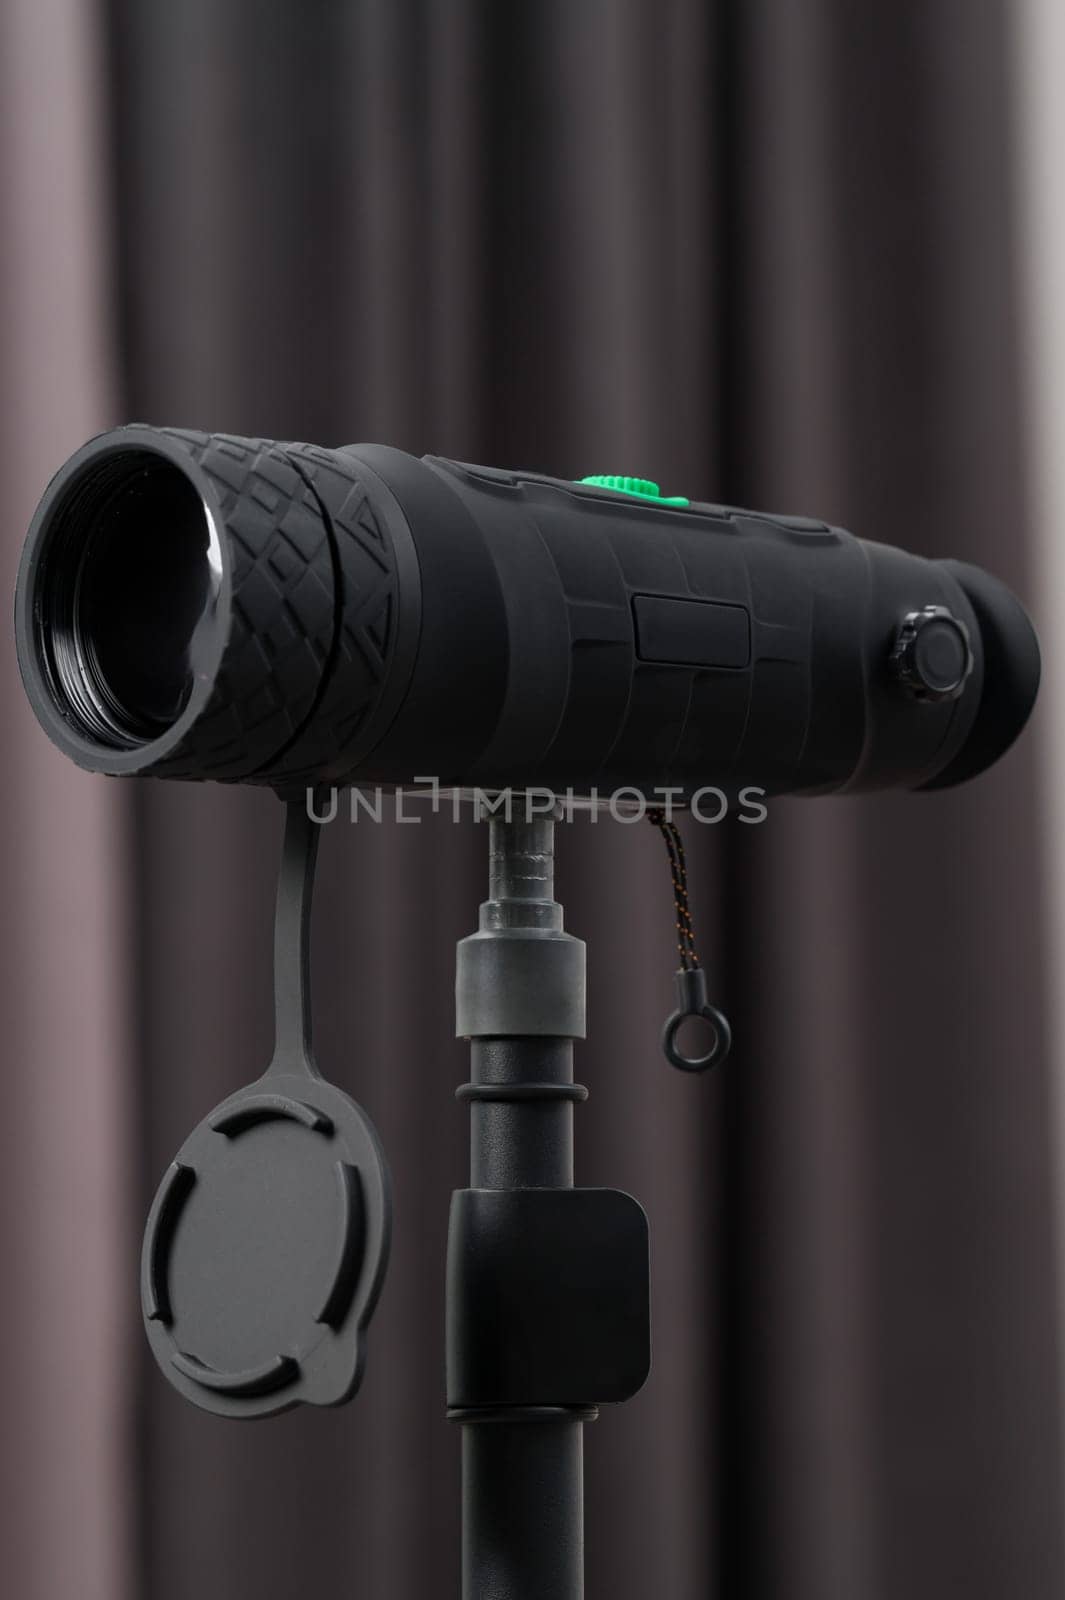 Long-range military monocular with rice protective case.